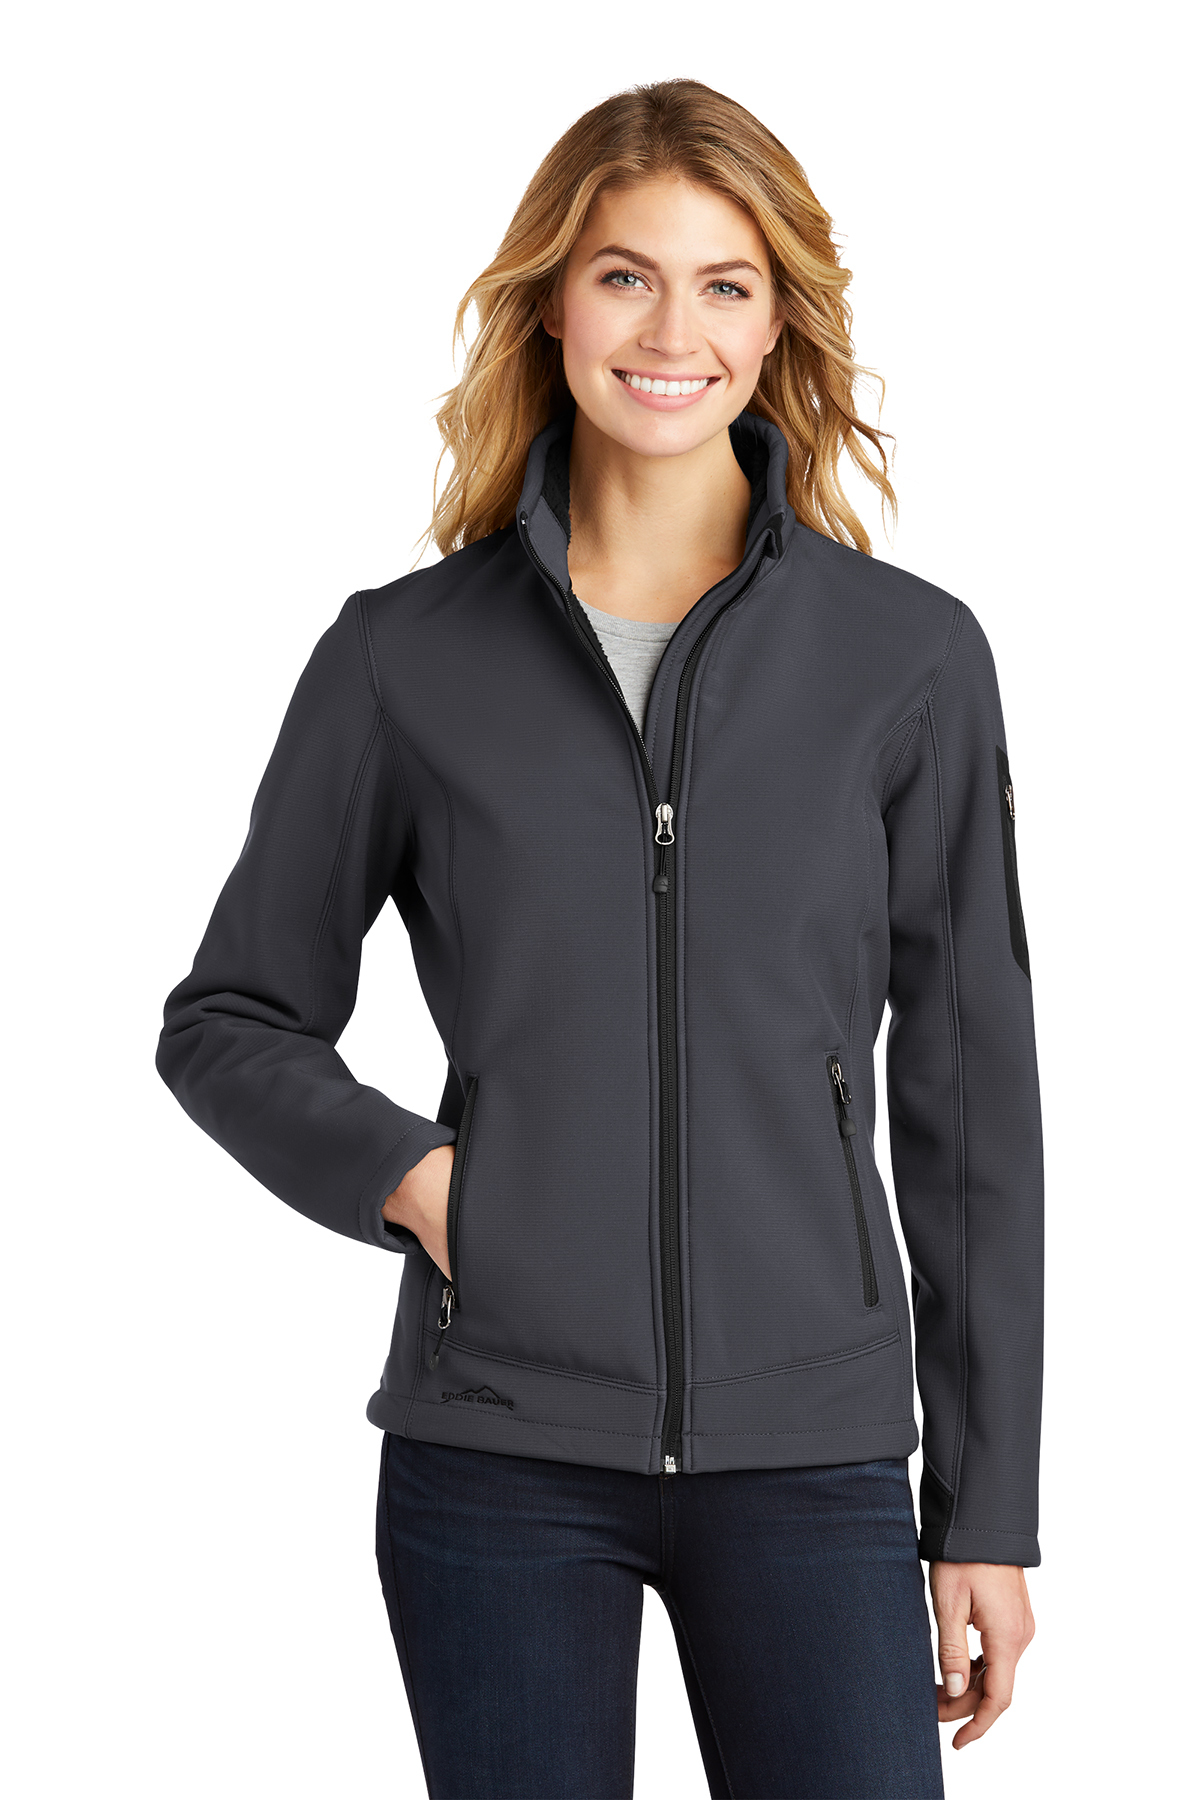 Eddie Bauer Ladies Rugged Ripstop Soft Shell Jacket, Product